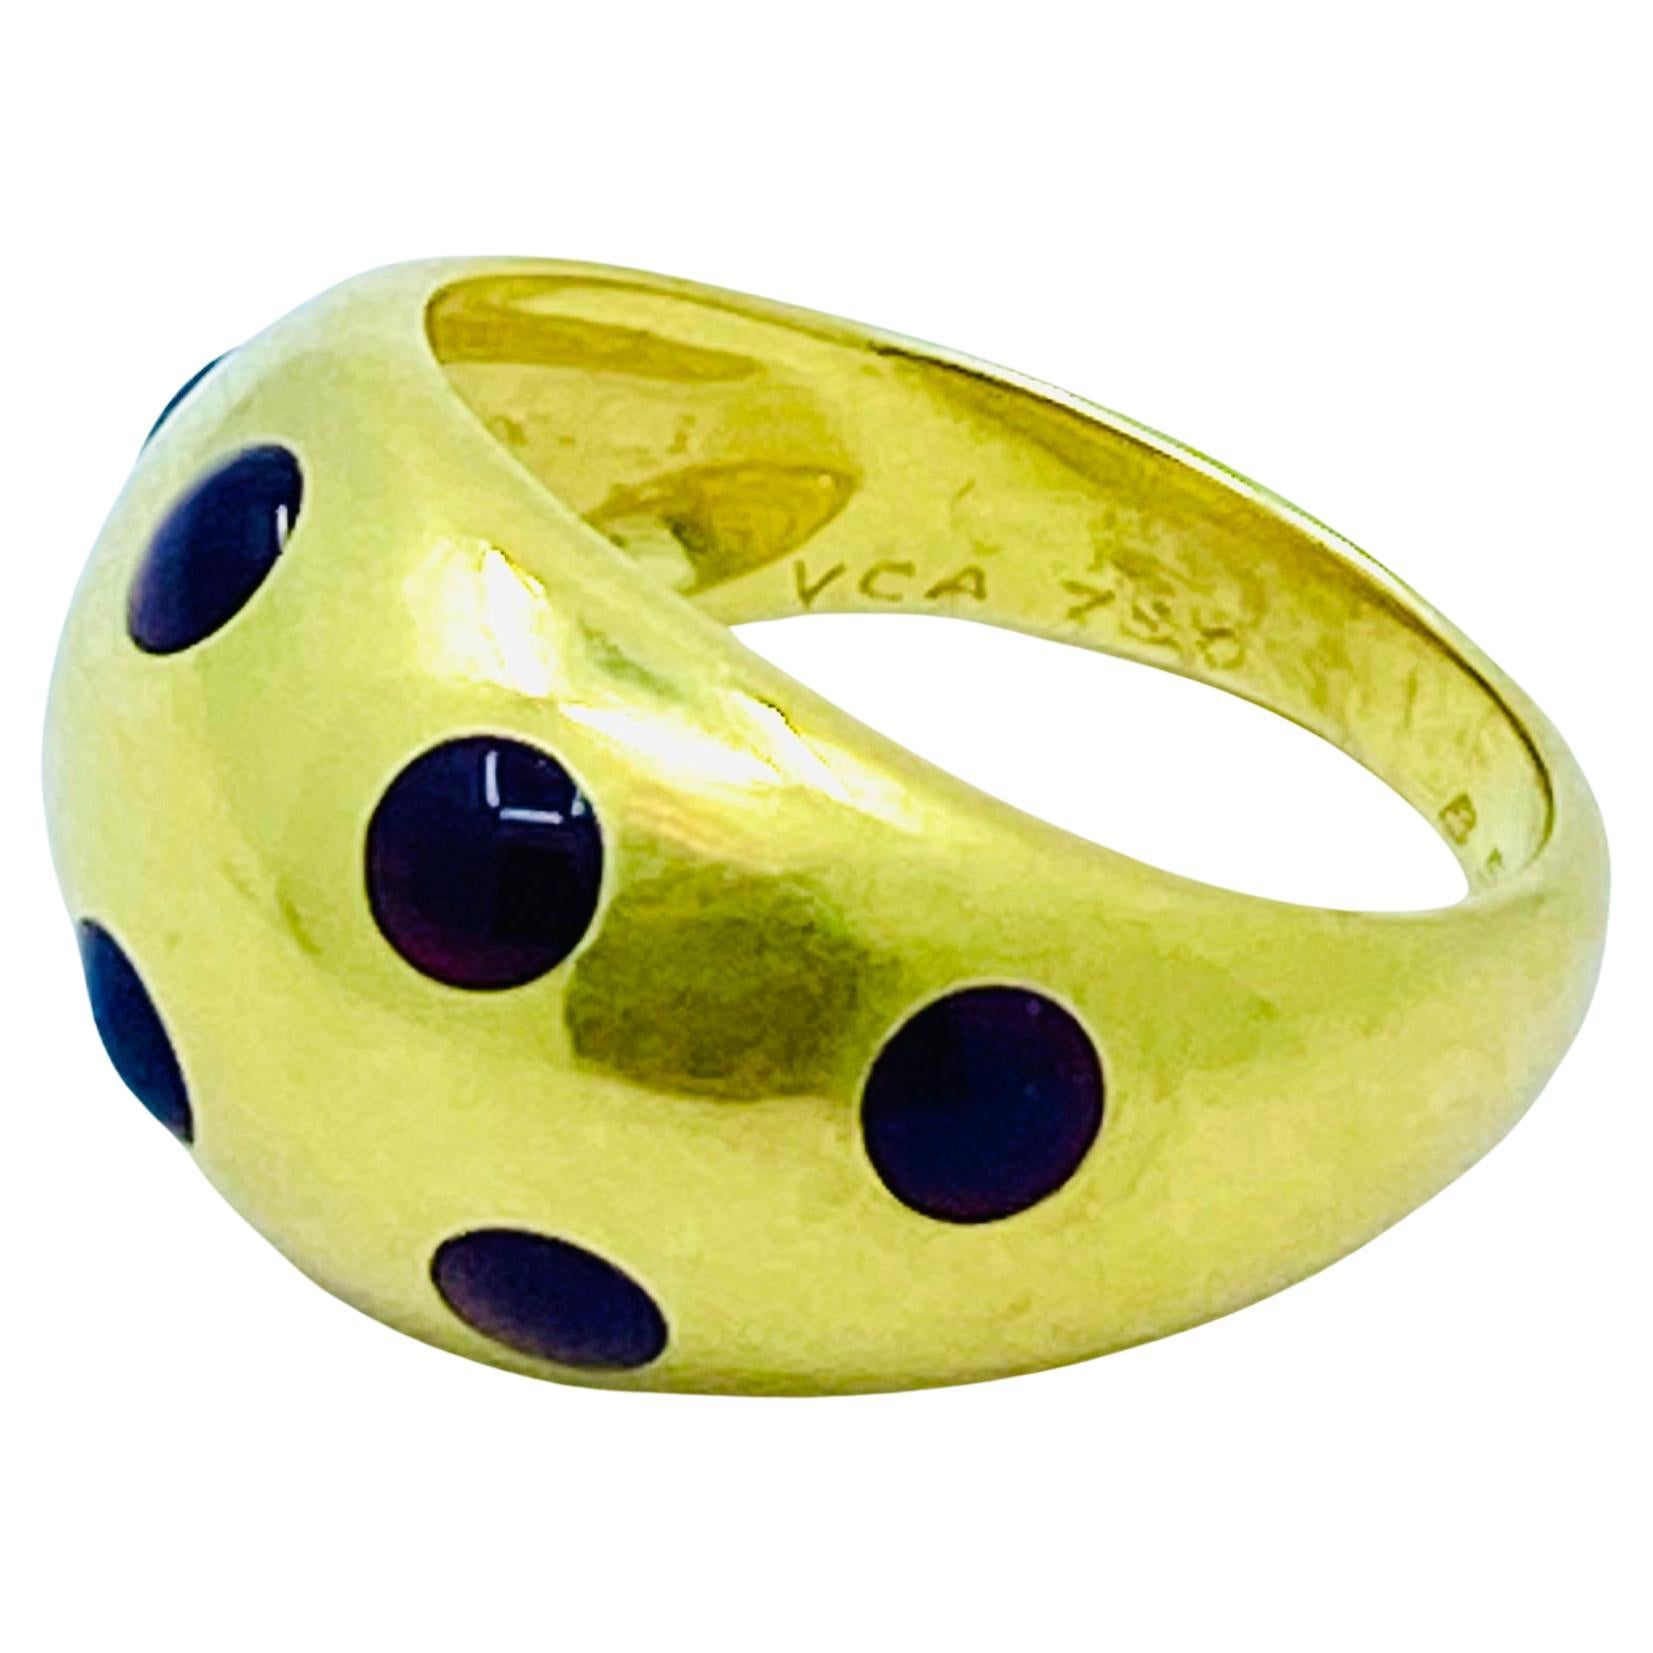 Van Cleef & Arpels Enamel Polka Dot Gold Dome Ring In Good Condition For Sale In Beverly Hills, CA